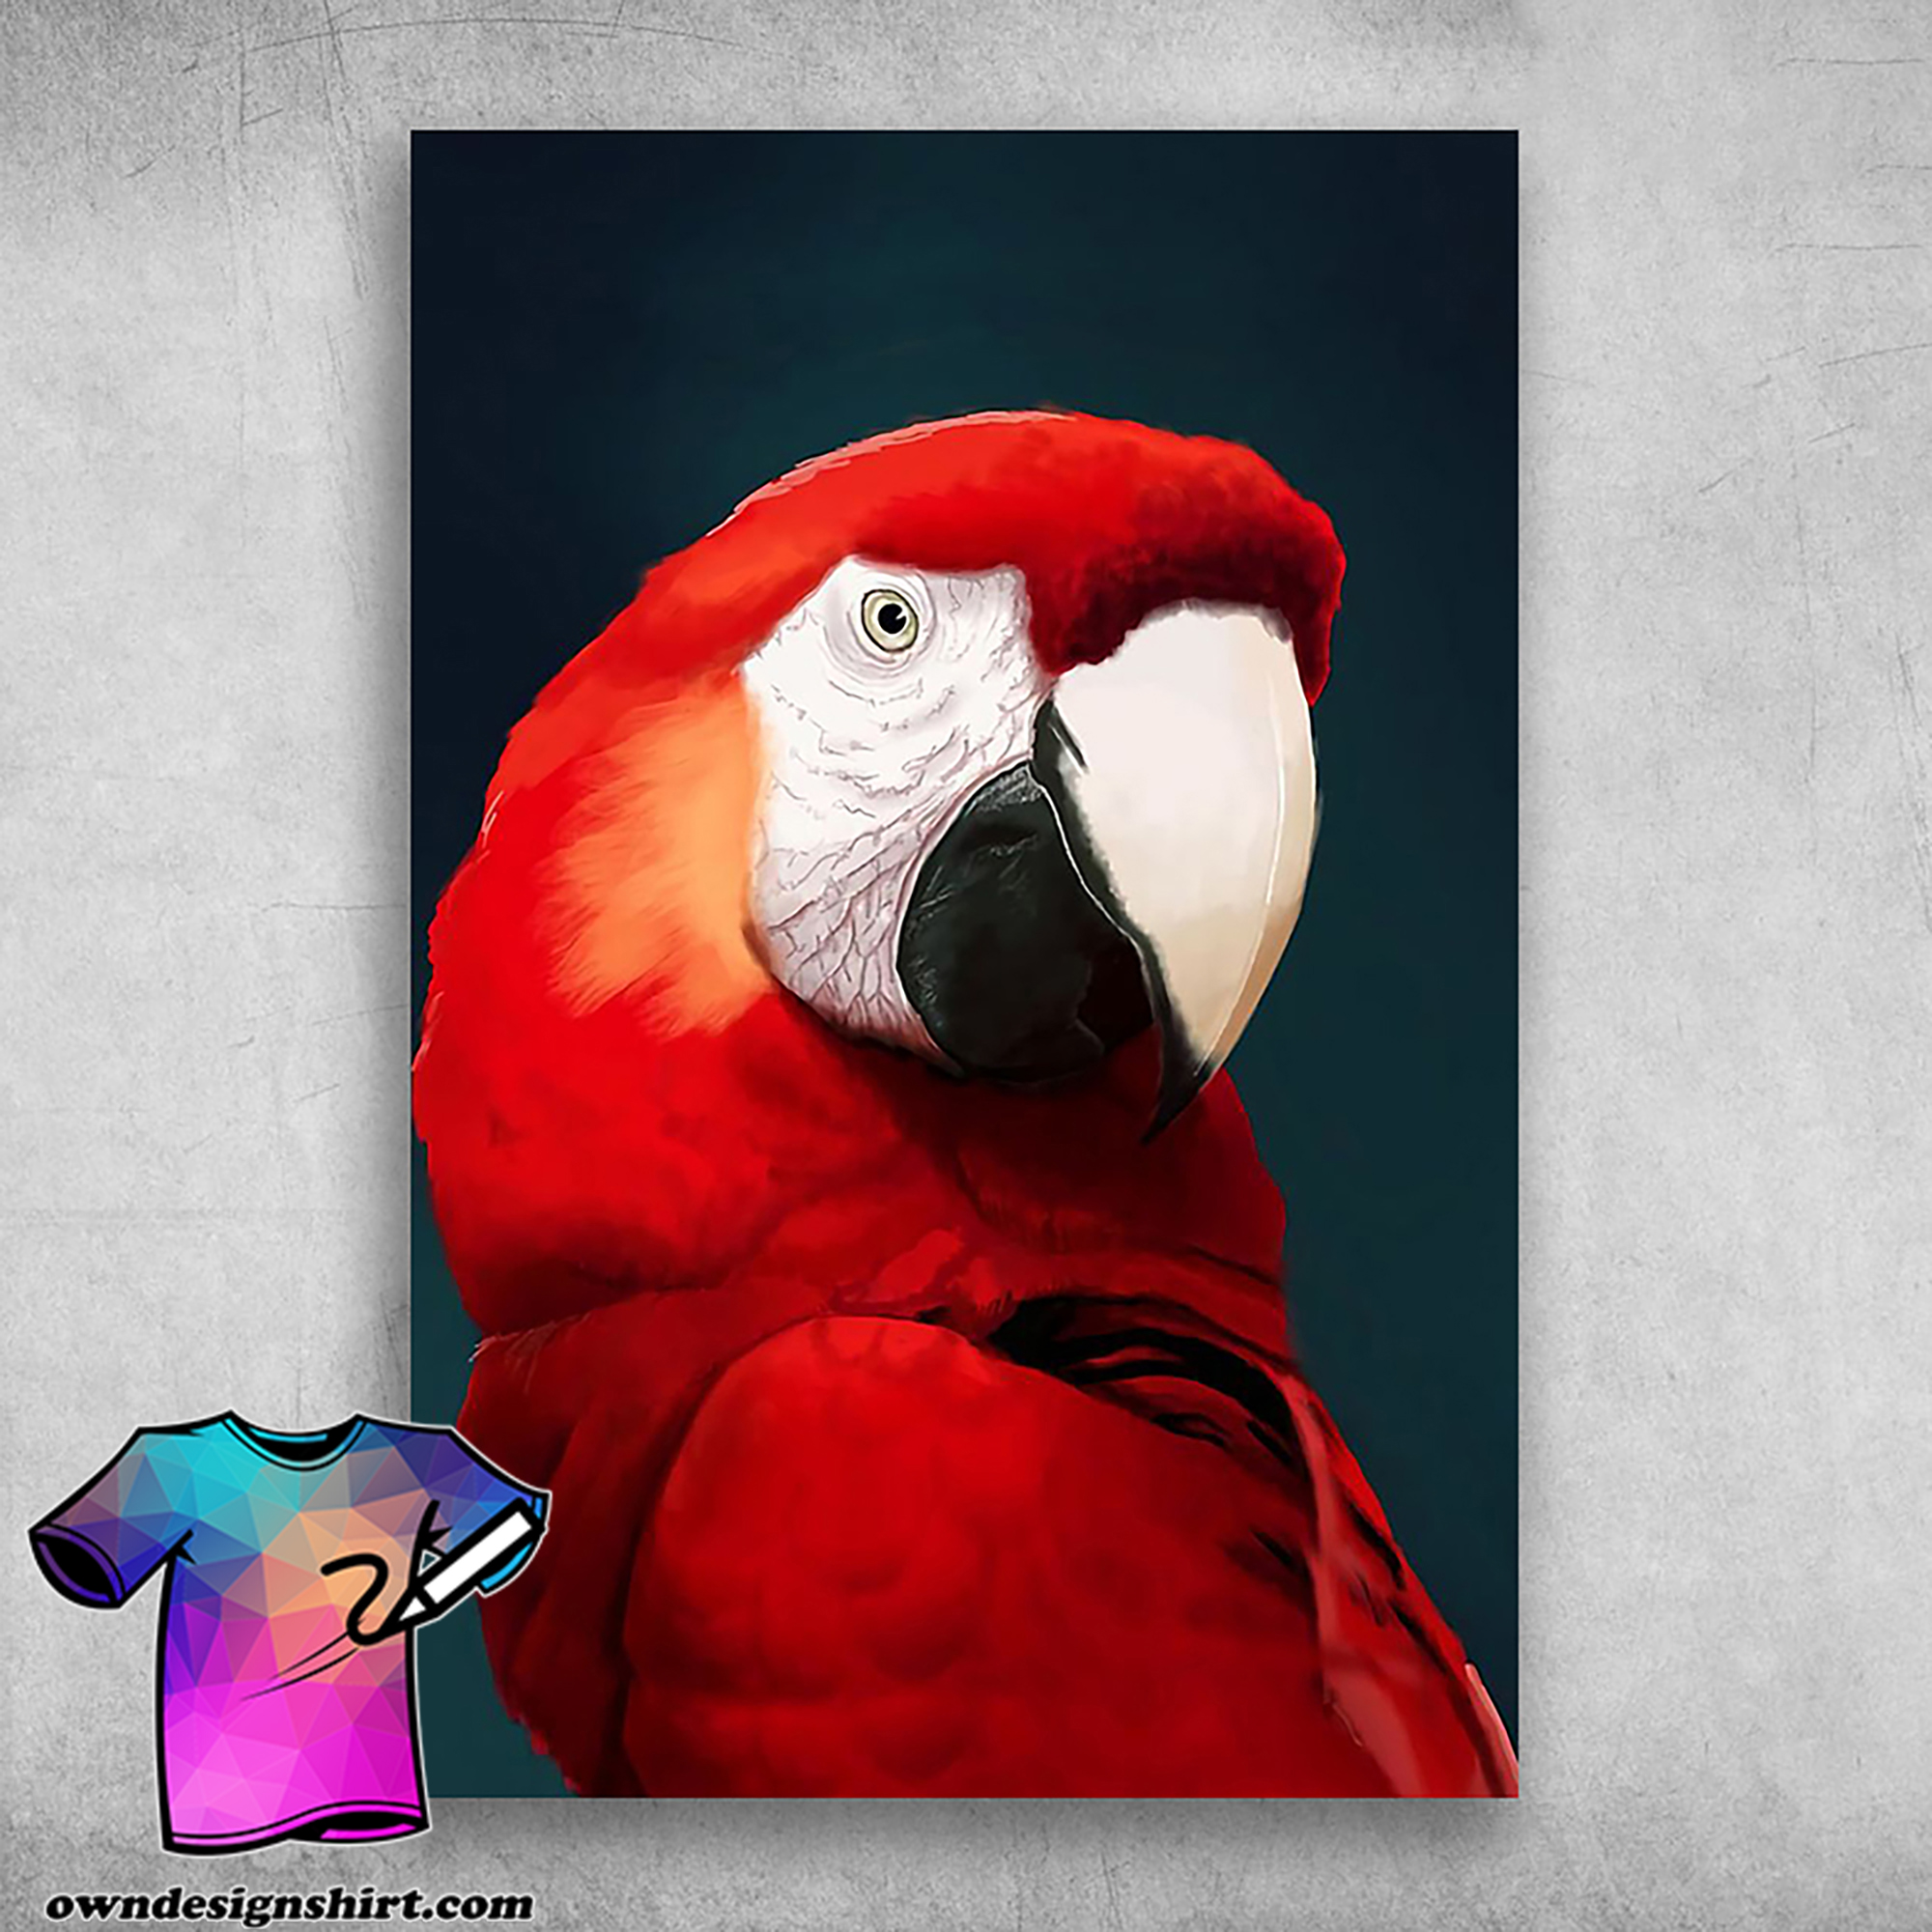 Amazing macaw beautifully designed red parrot poster